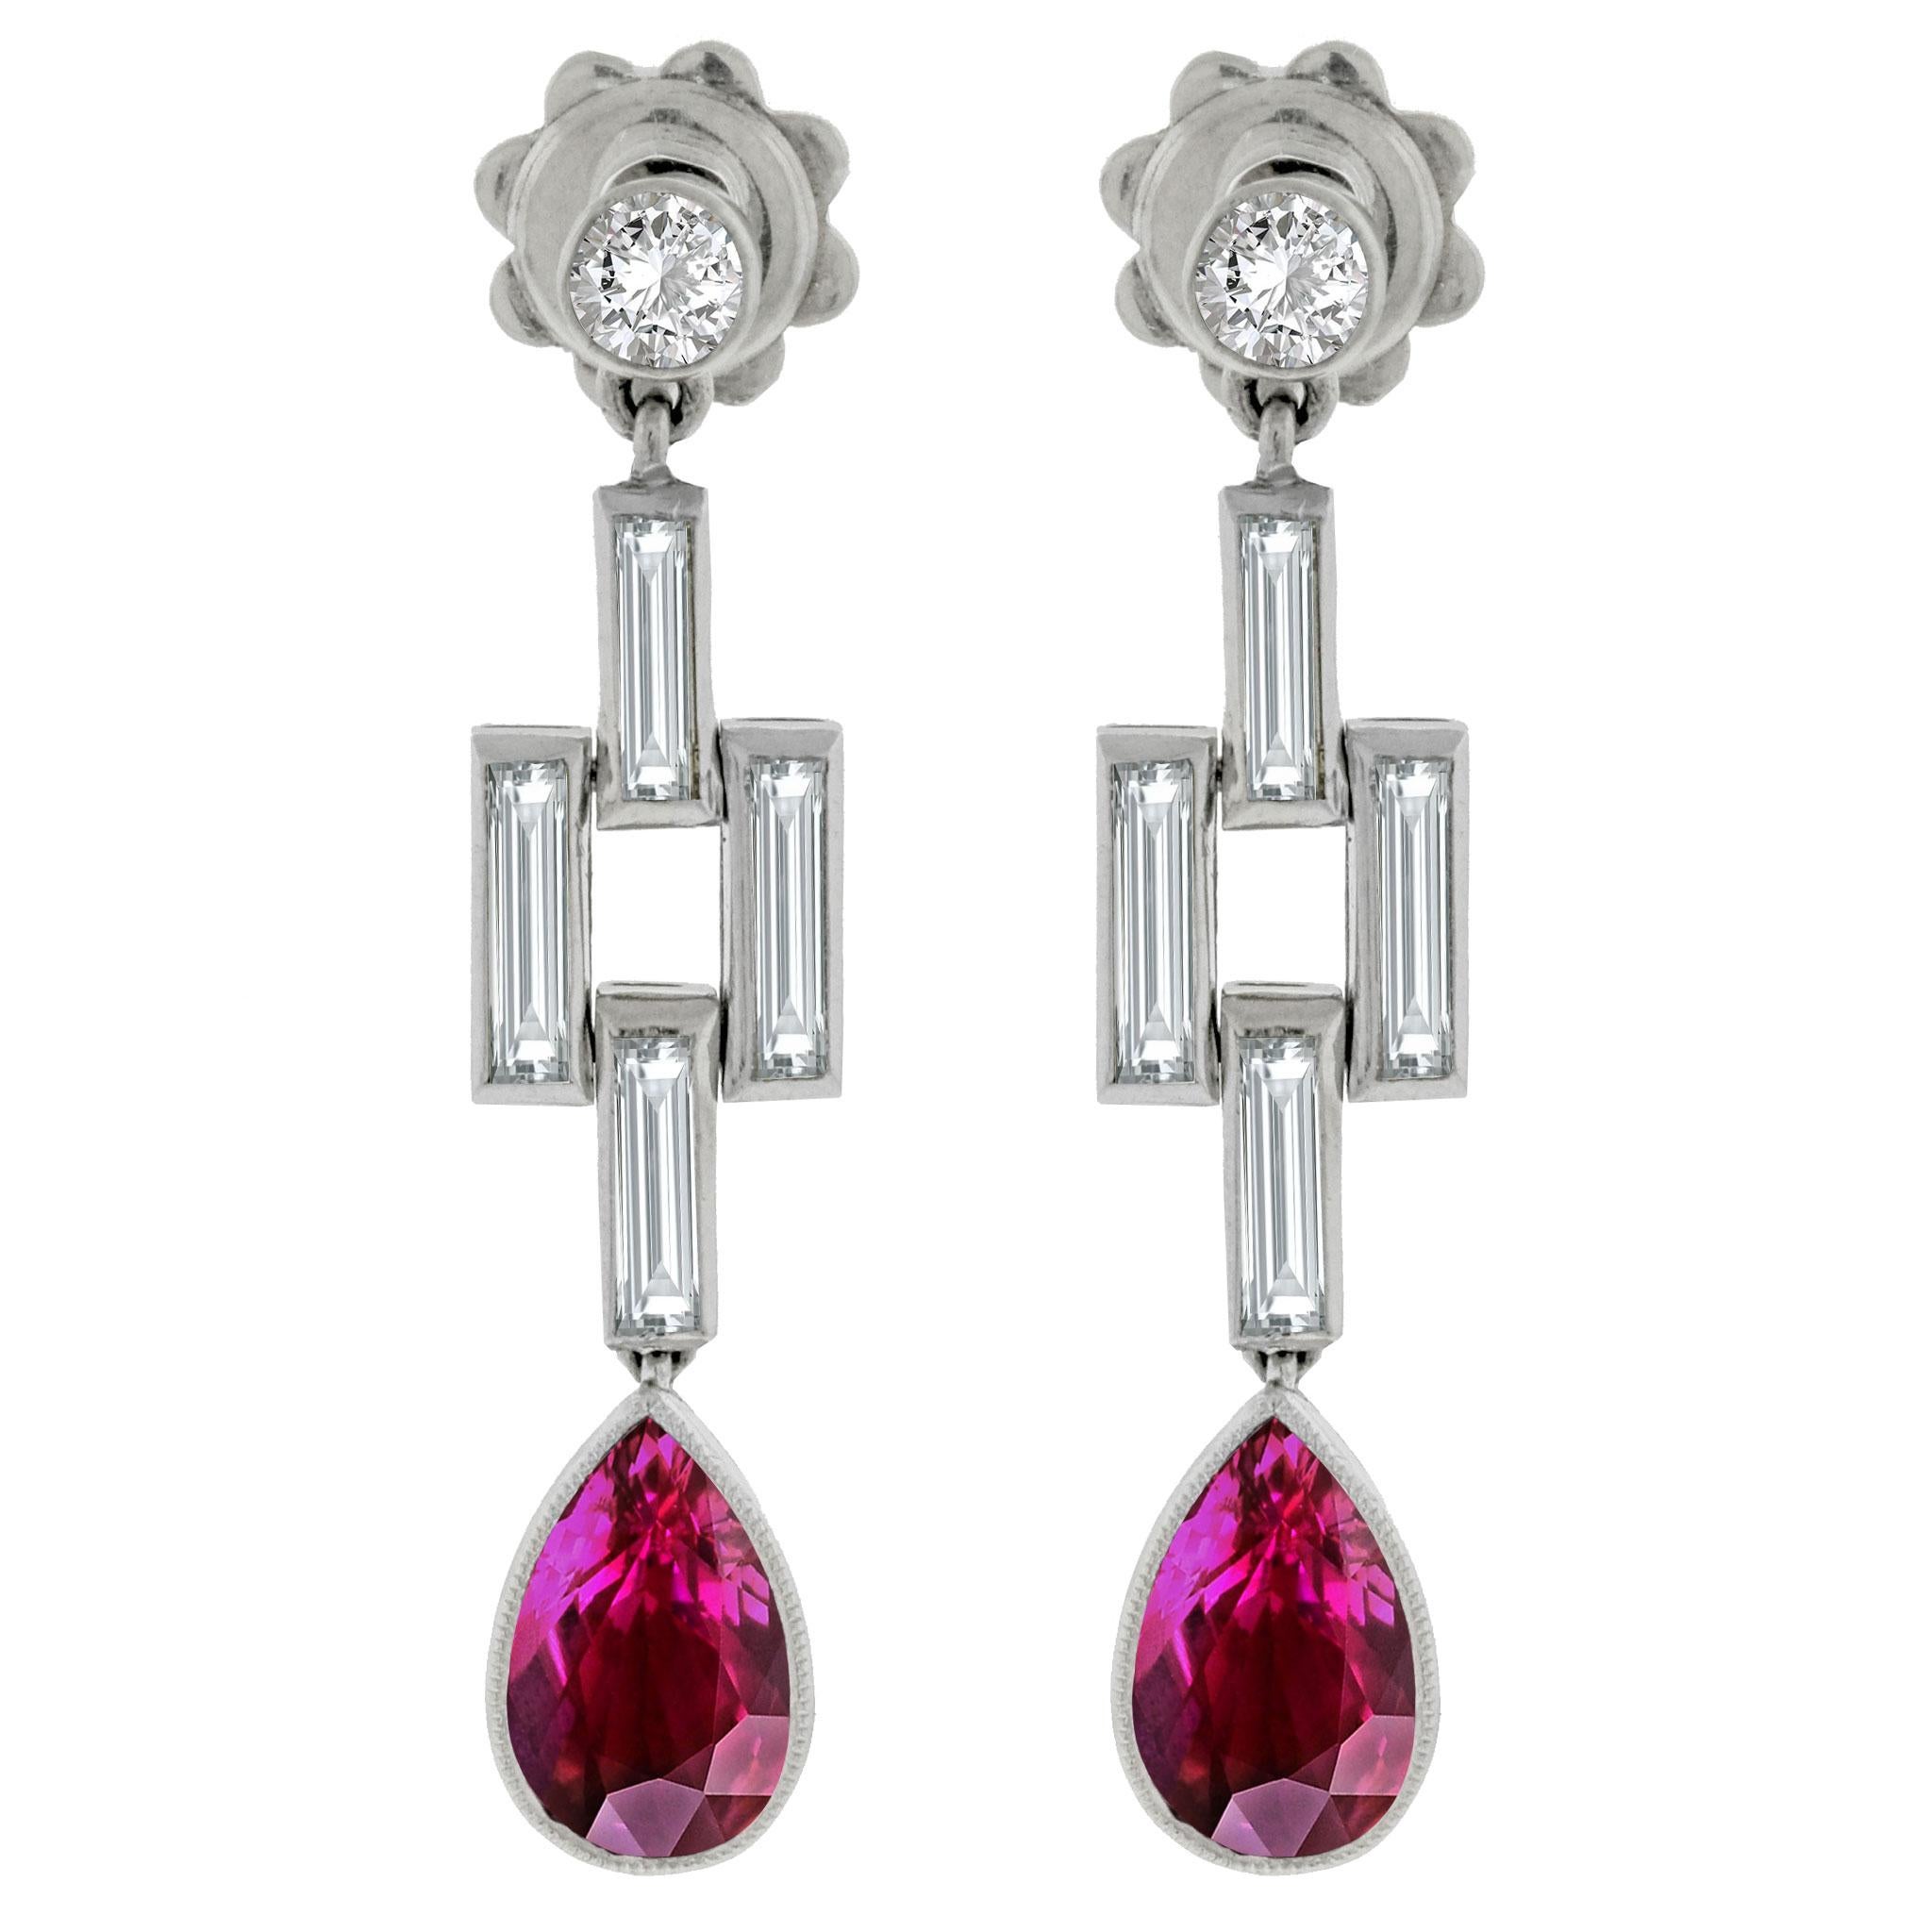 A sublime pair of vintage earrings featuring 2 rare unheated Burmese rubies. They are shaped as beautiful pears and have a bright vivid color found only in the finest of rubies. They are complemented by 1.50 carats of baguette and round